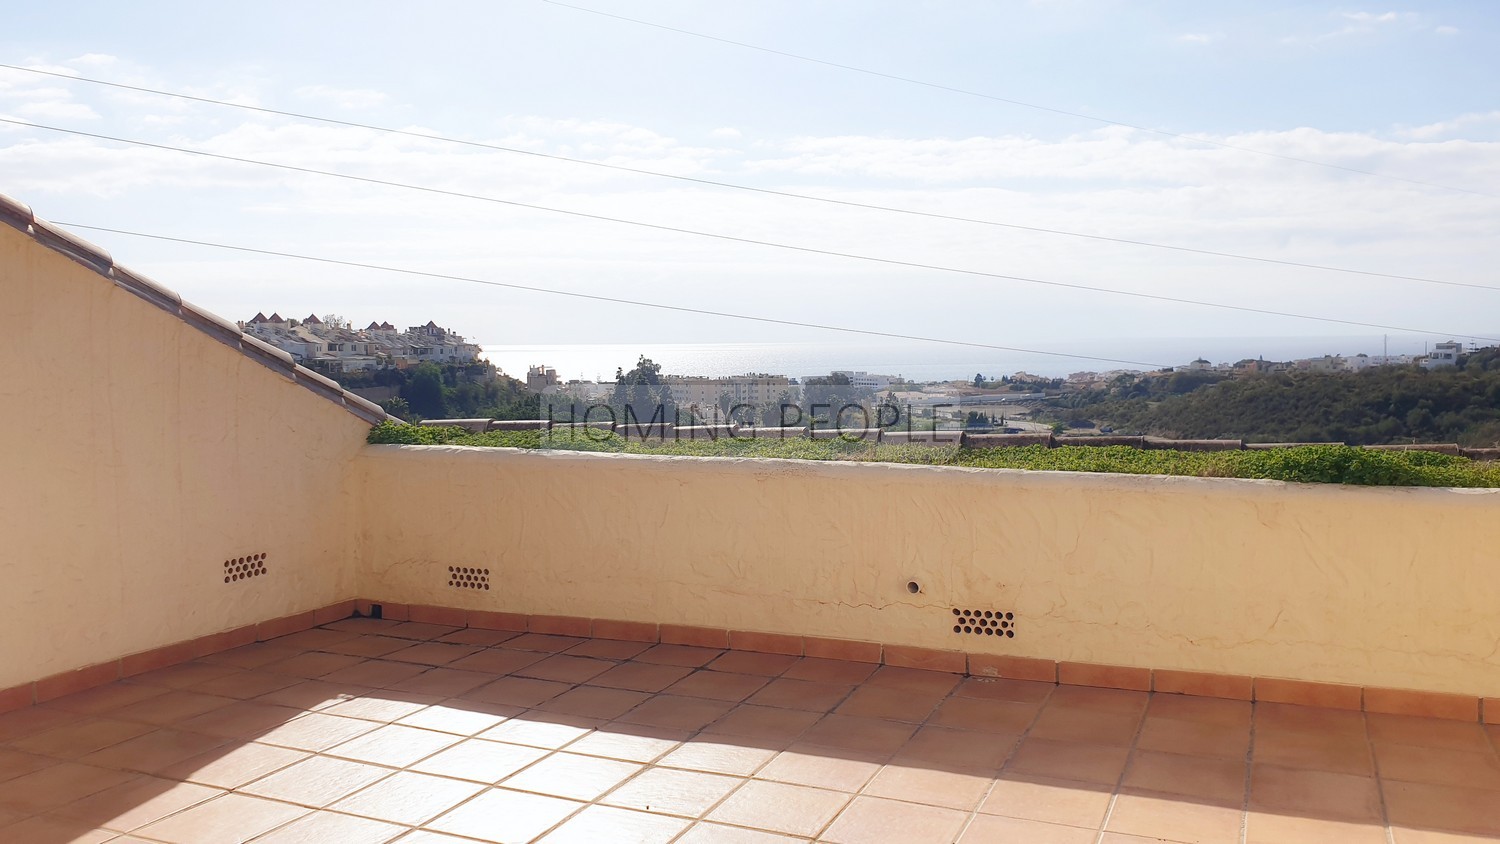 Great semi-detached villa: Small garden, sea views, communal pool... and a stroll away from the golf course !